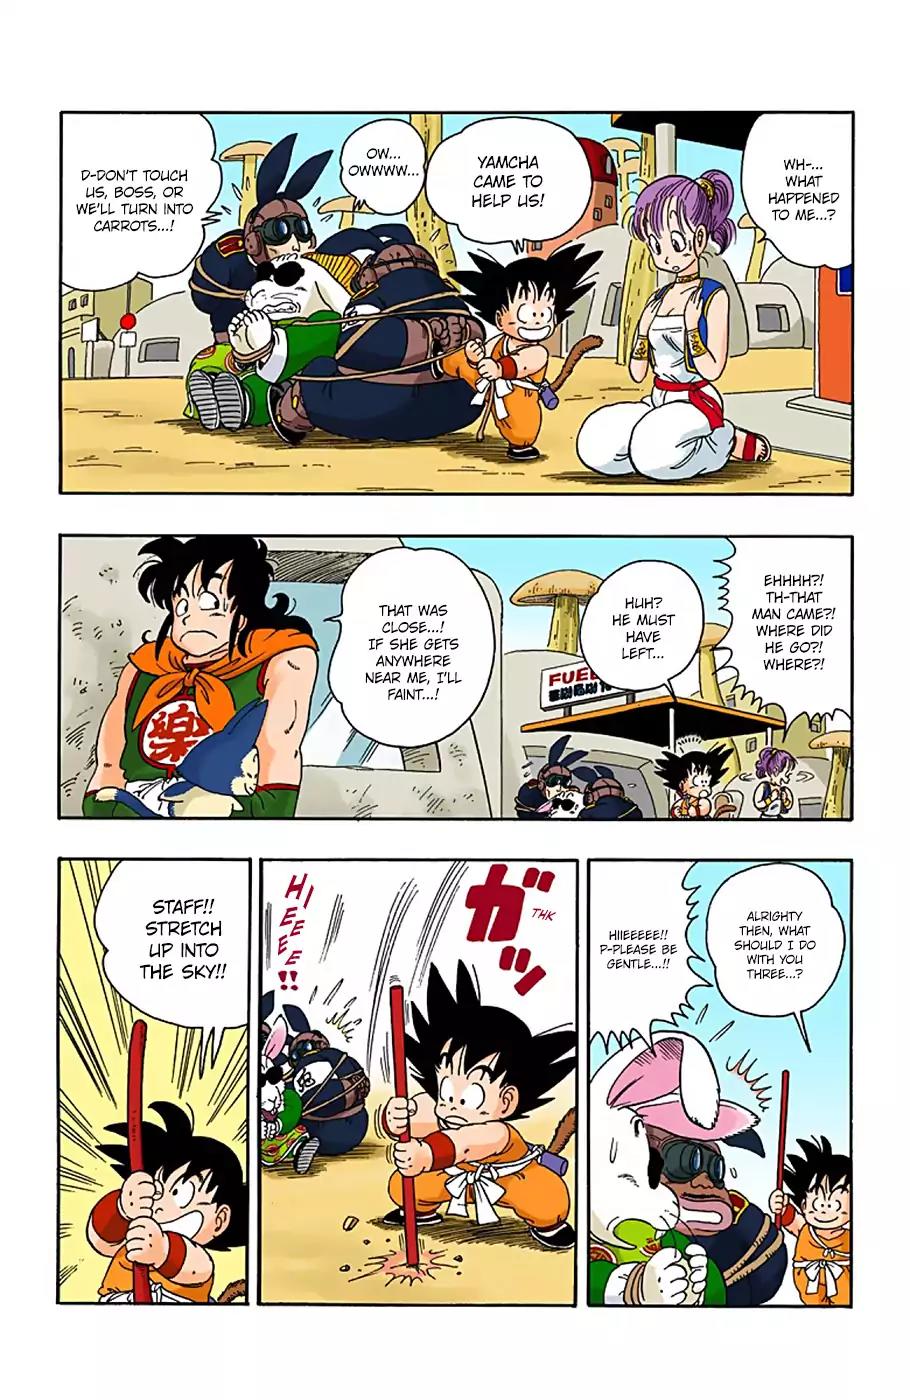 Dragon Ball - Full Color Vol.2 Chapter 17: